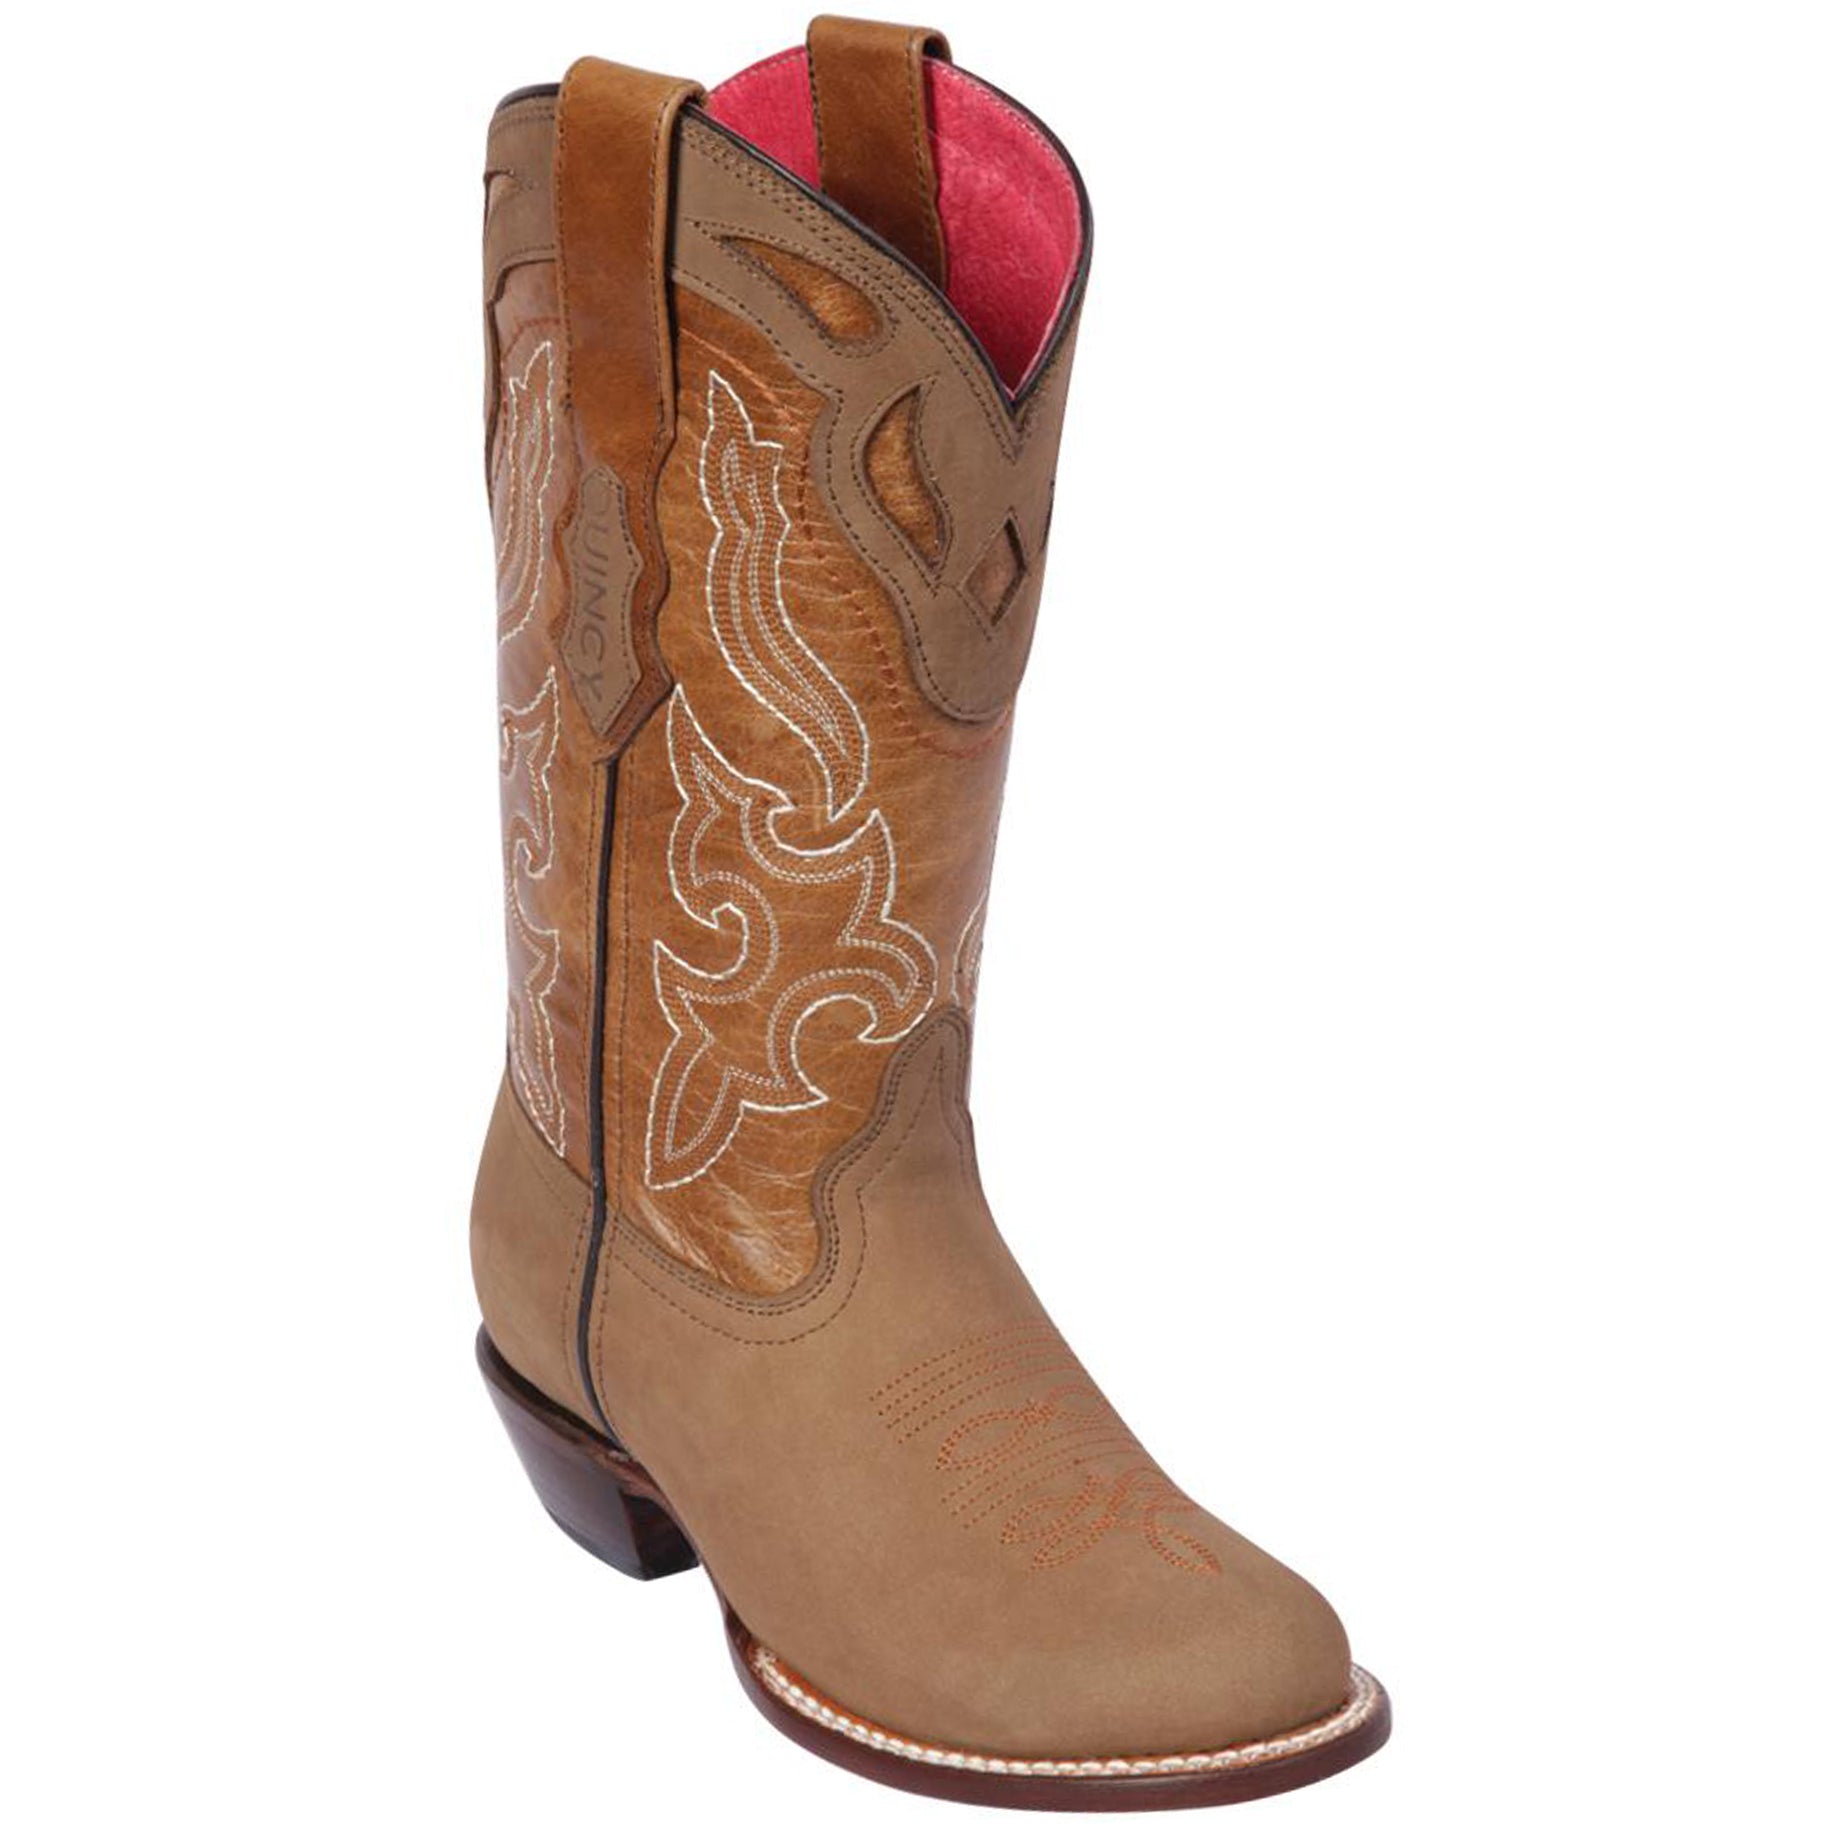 Womens Cowboy Boots & Cowgirl Boots | Vaquero Boots – Page 3